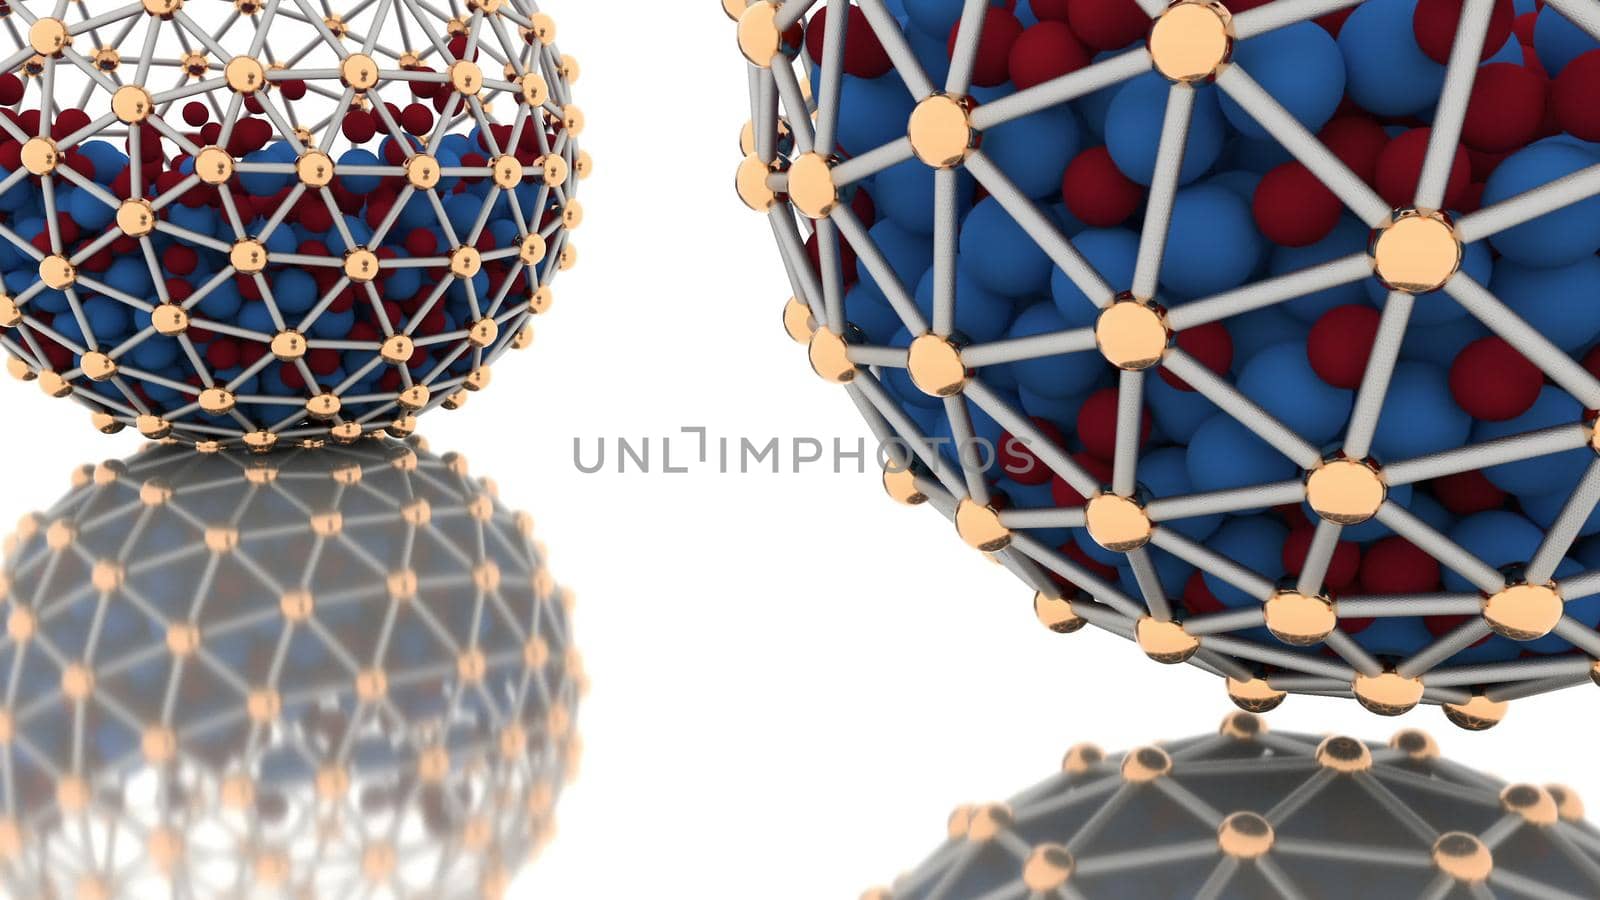 Abstract CGI motion graphics with fantastic spheres 3D rendering by designprojects